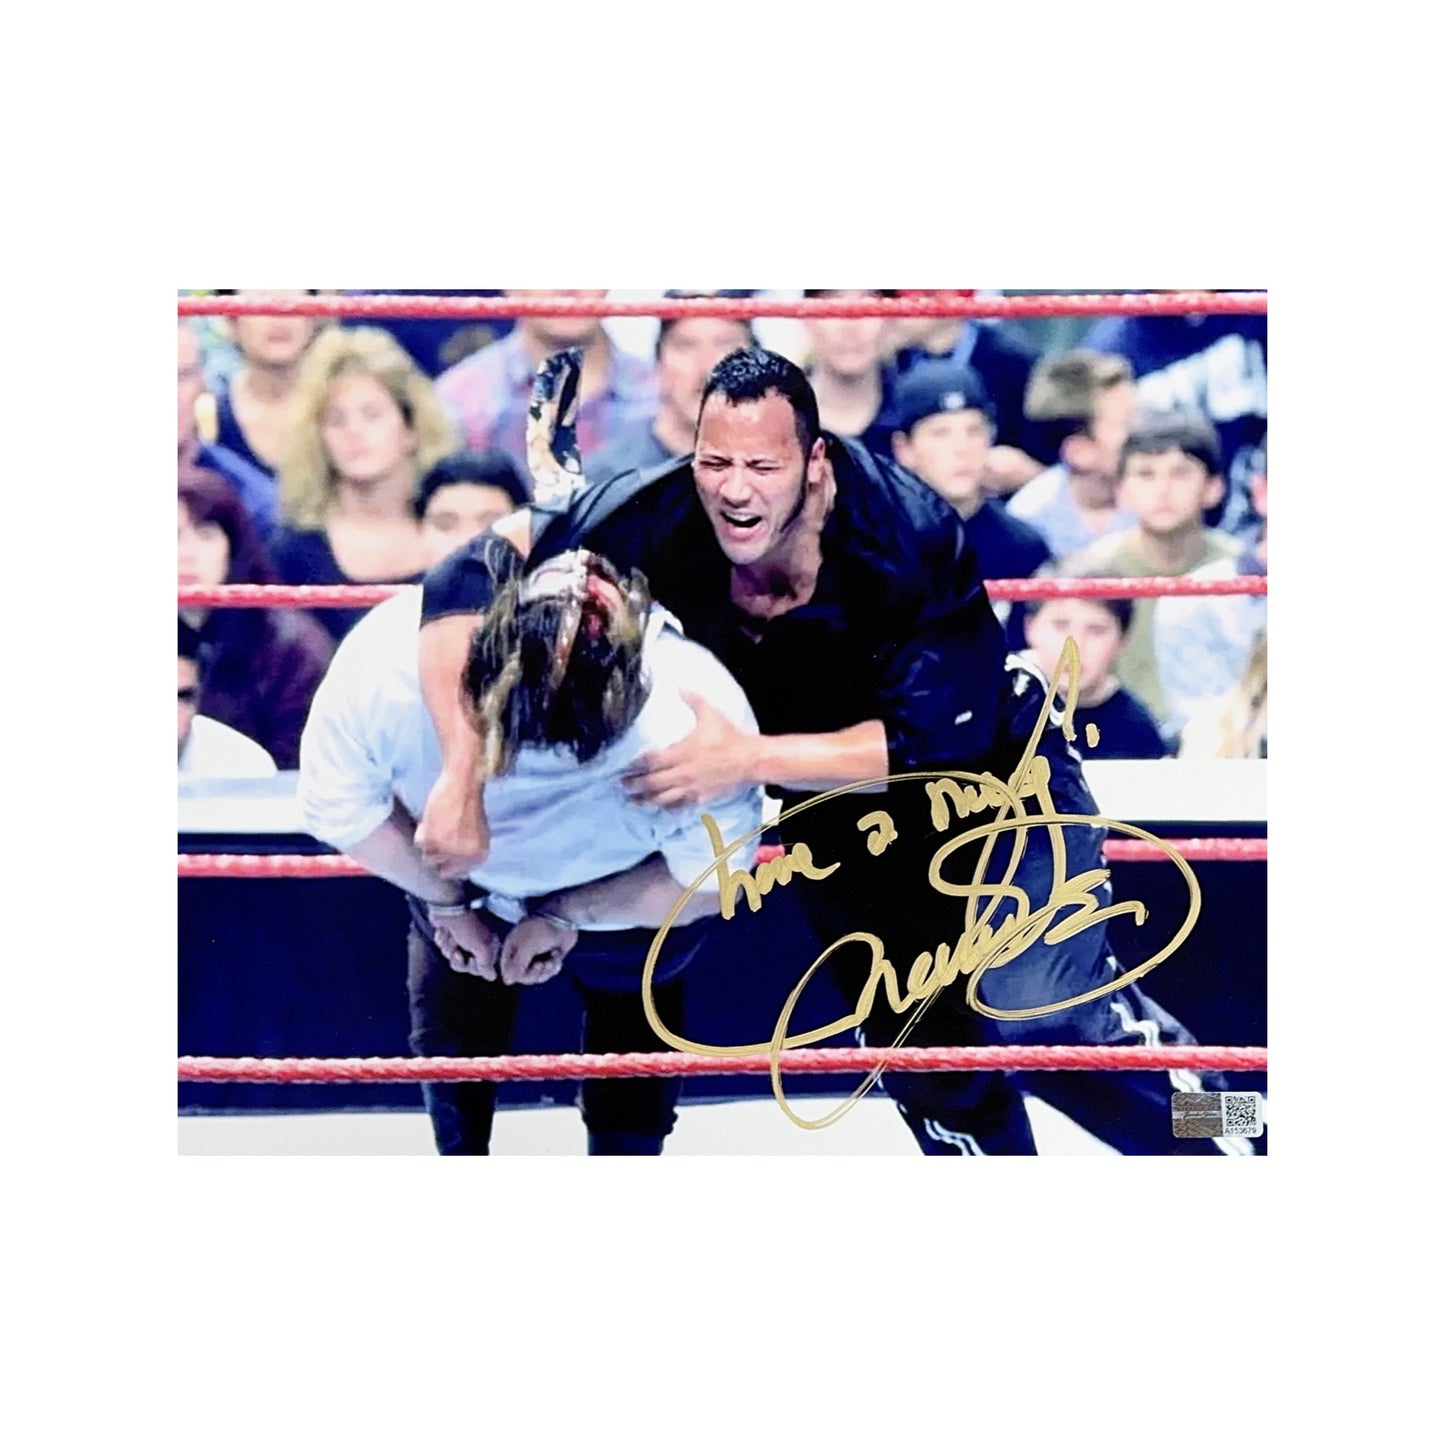 Mick Foley Autographed Mankind WWE Tackle vs The Rock 8x10 “Have a Nice Day” Inscription Steiner CX